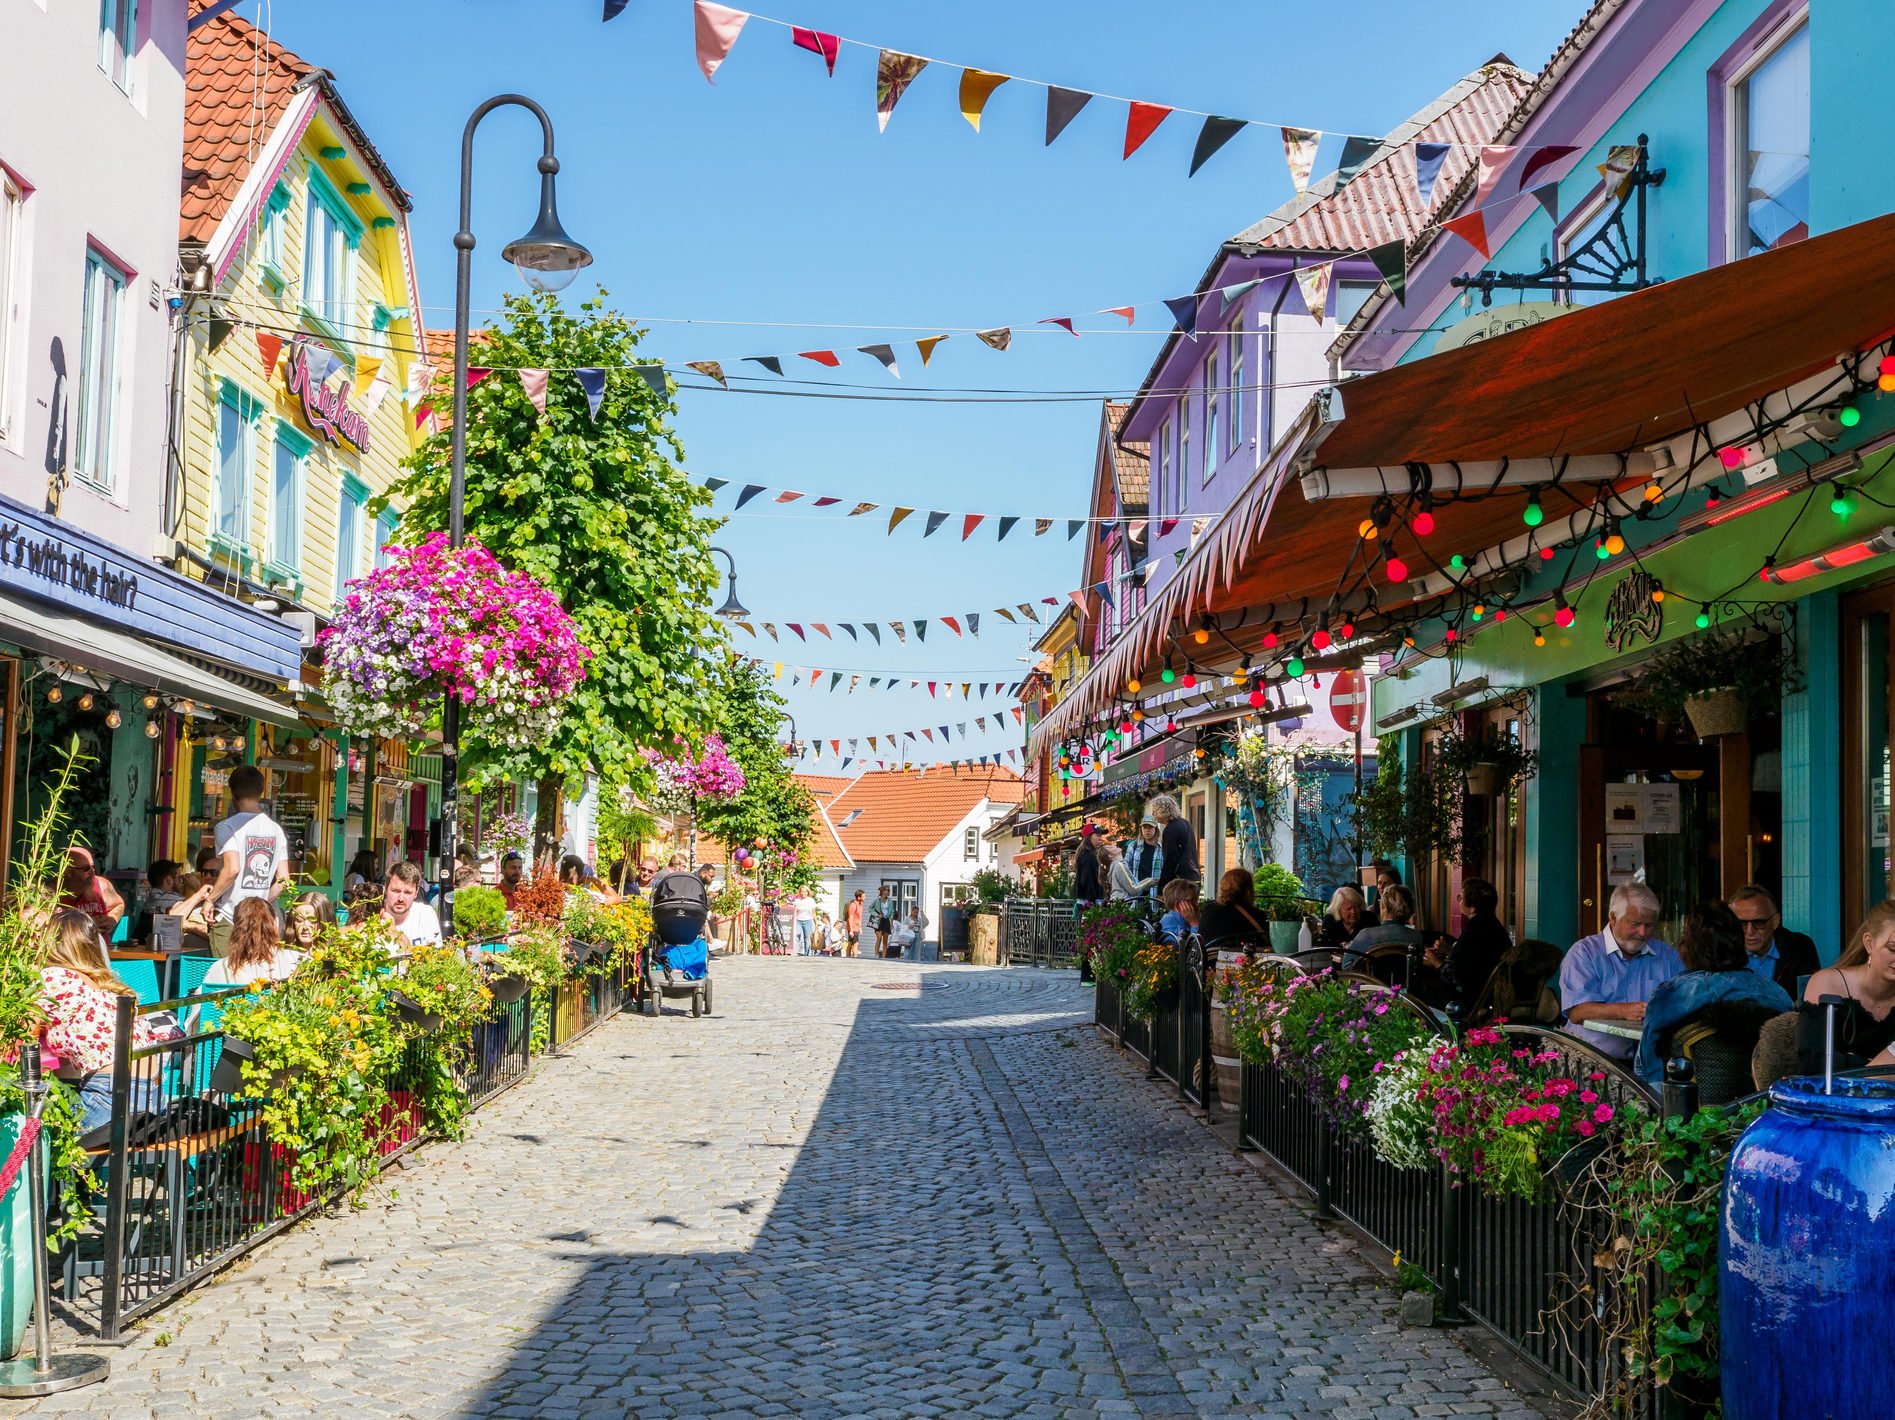 Stavanger, Norway - July 22, 2021: Tourists on historical street in Stavanger old town with multicolor wooden houses.